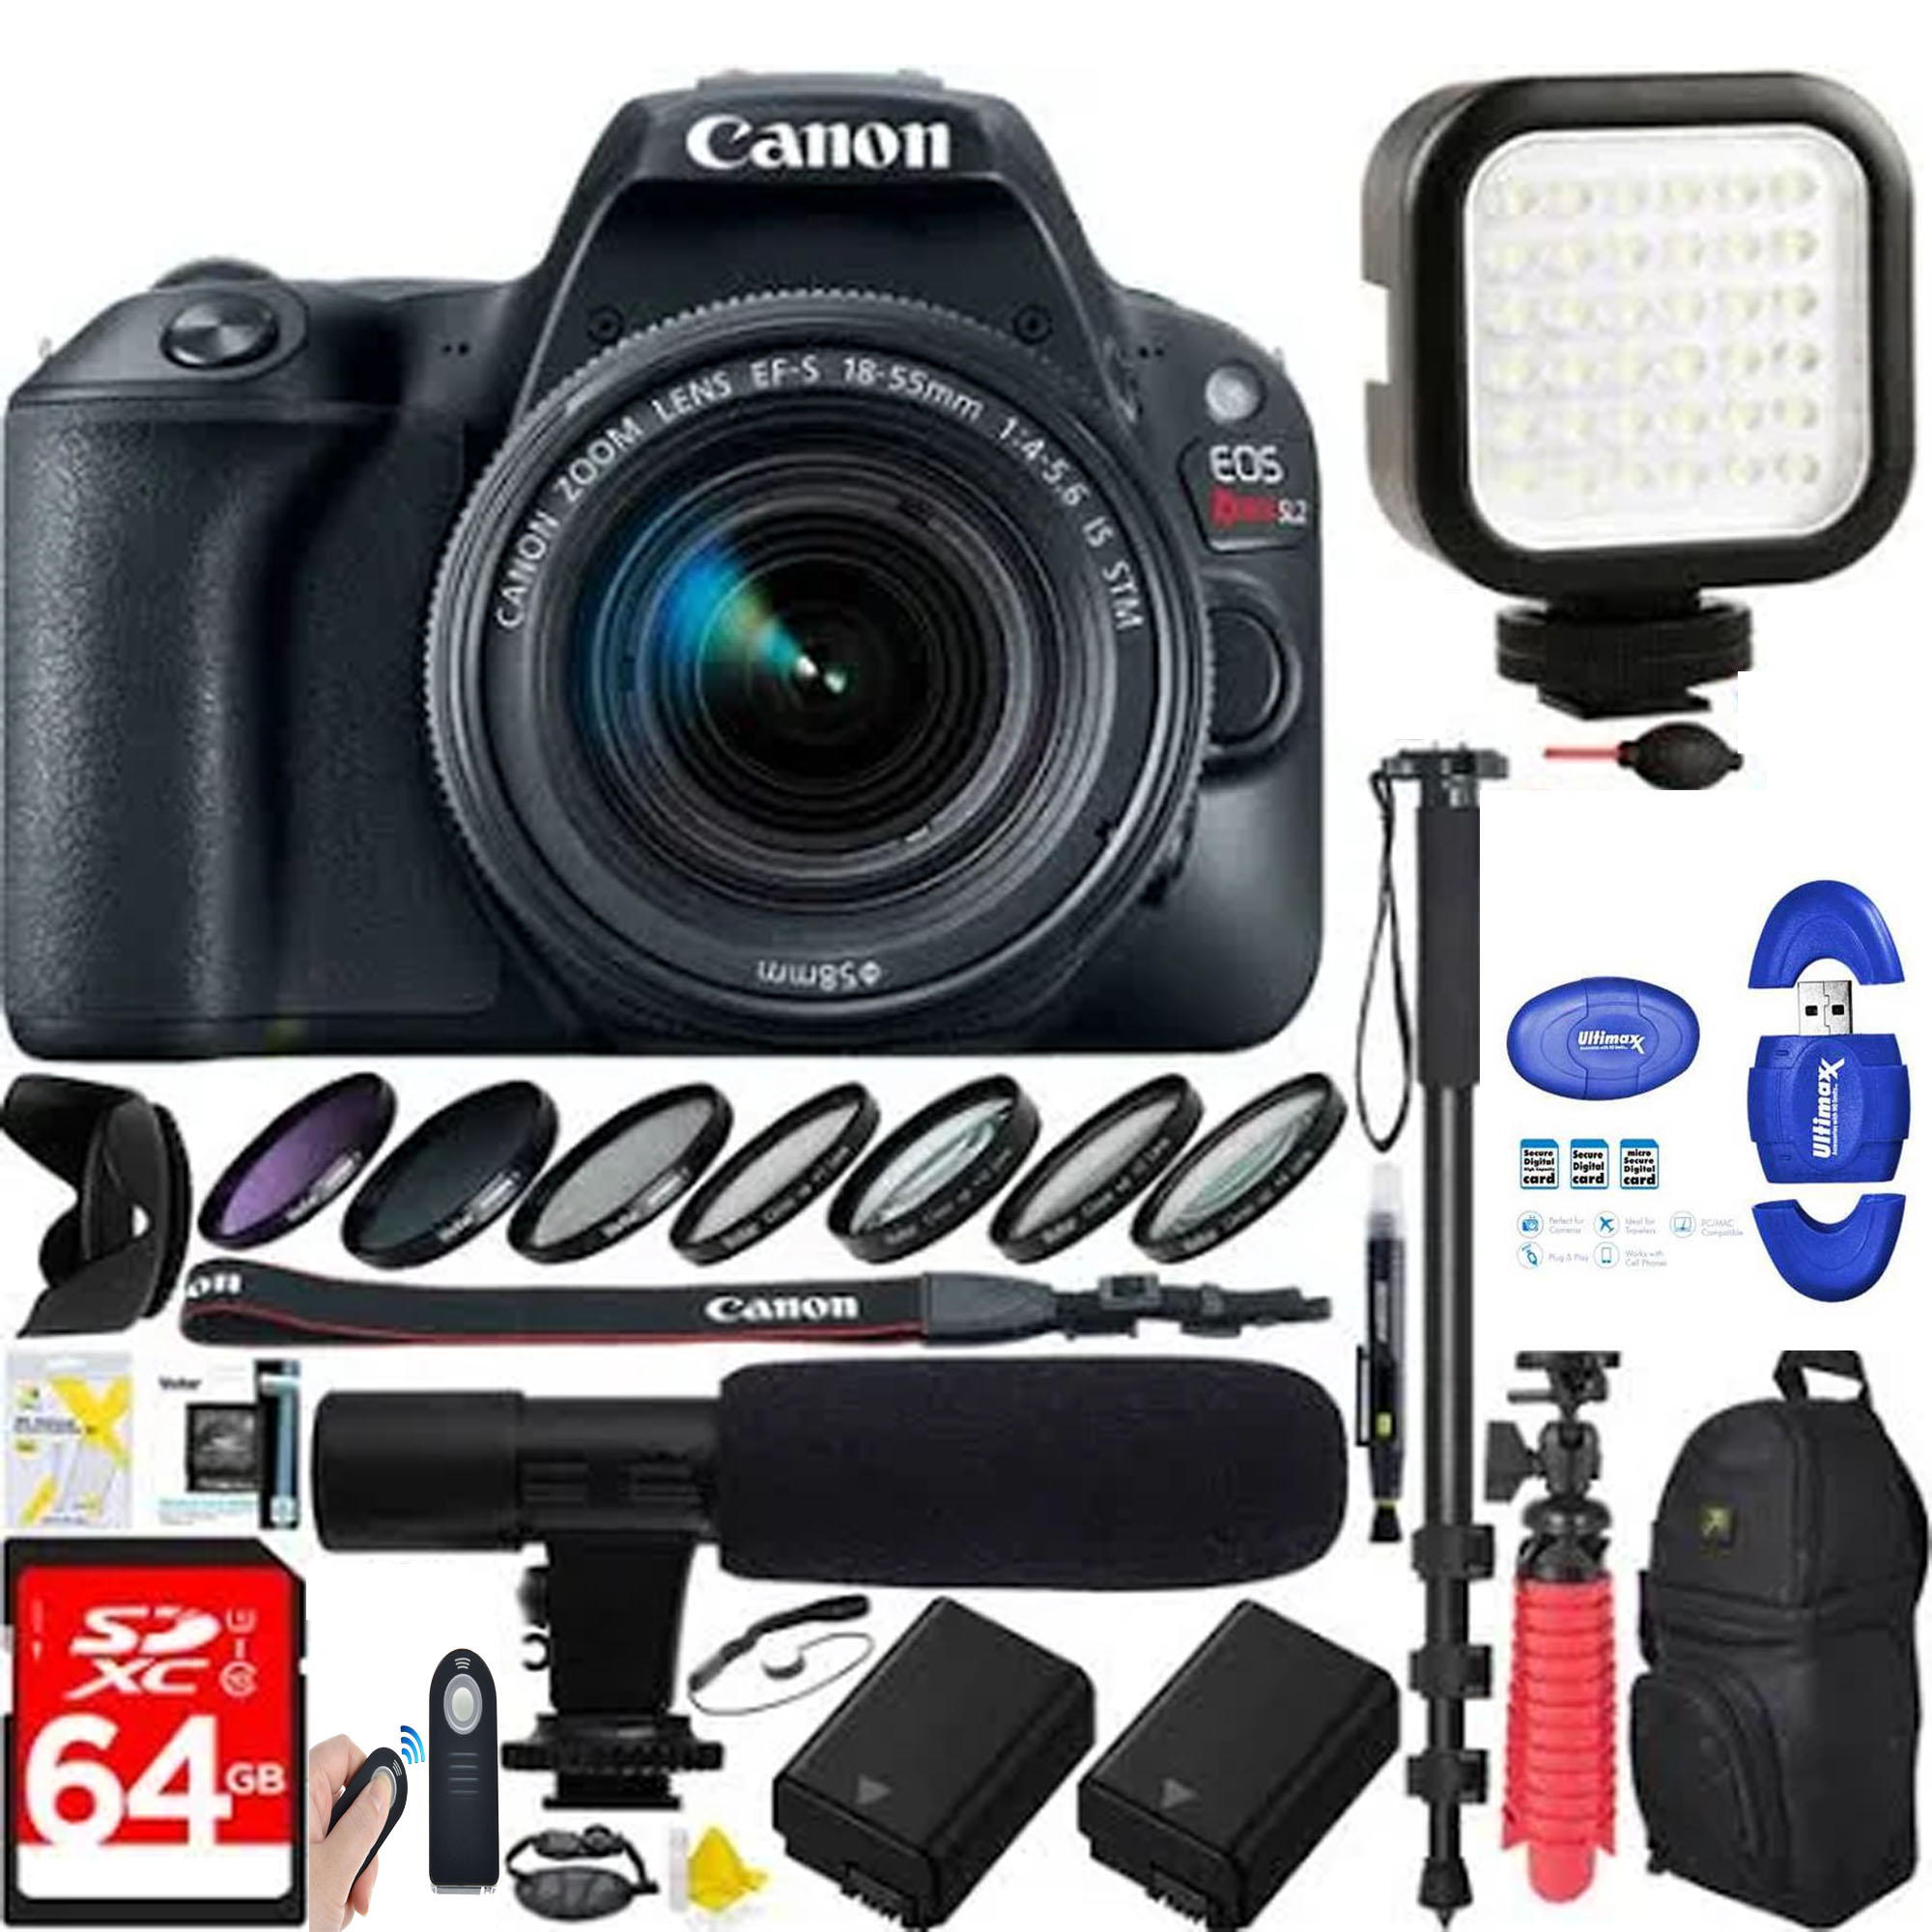 Canon EOS Rebel SL2 DSLR Camera with 18-55mm Lens (Black) with 64GB Dual Battery & Mic Pro Video Bundle - image 1 of 1